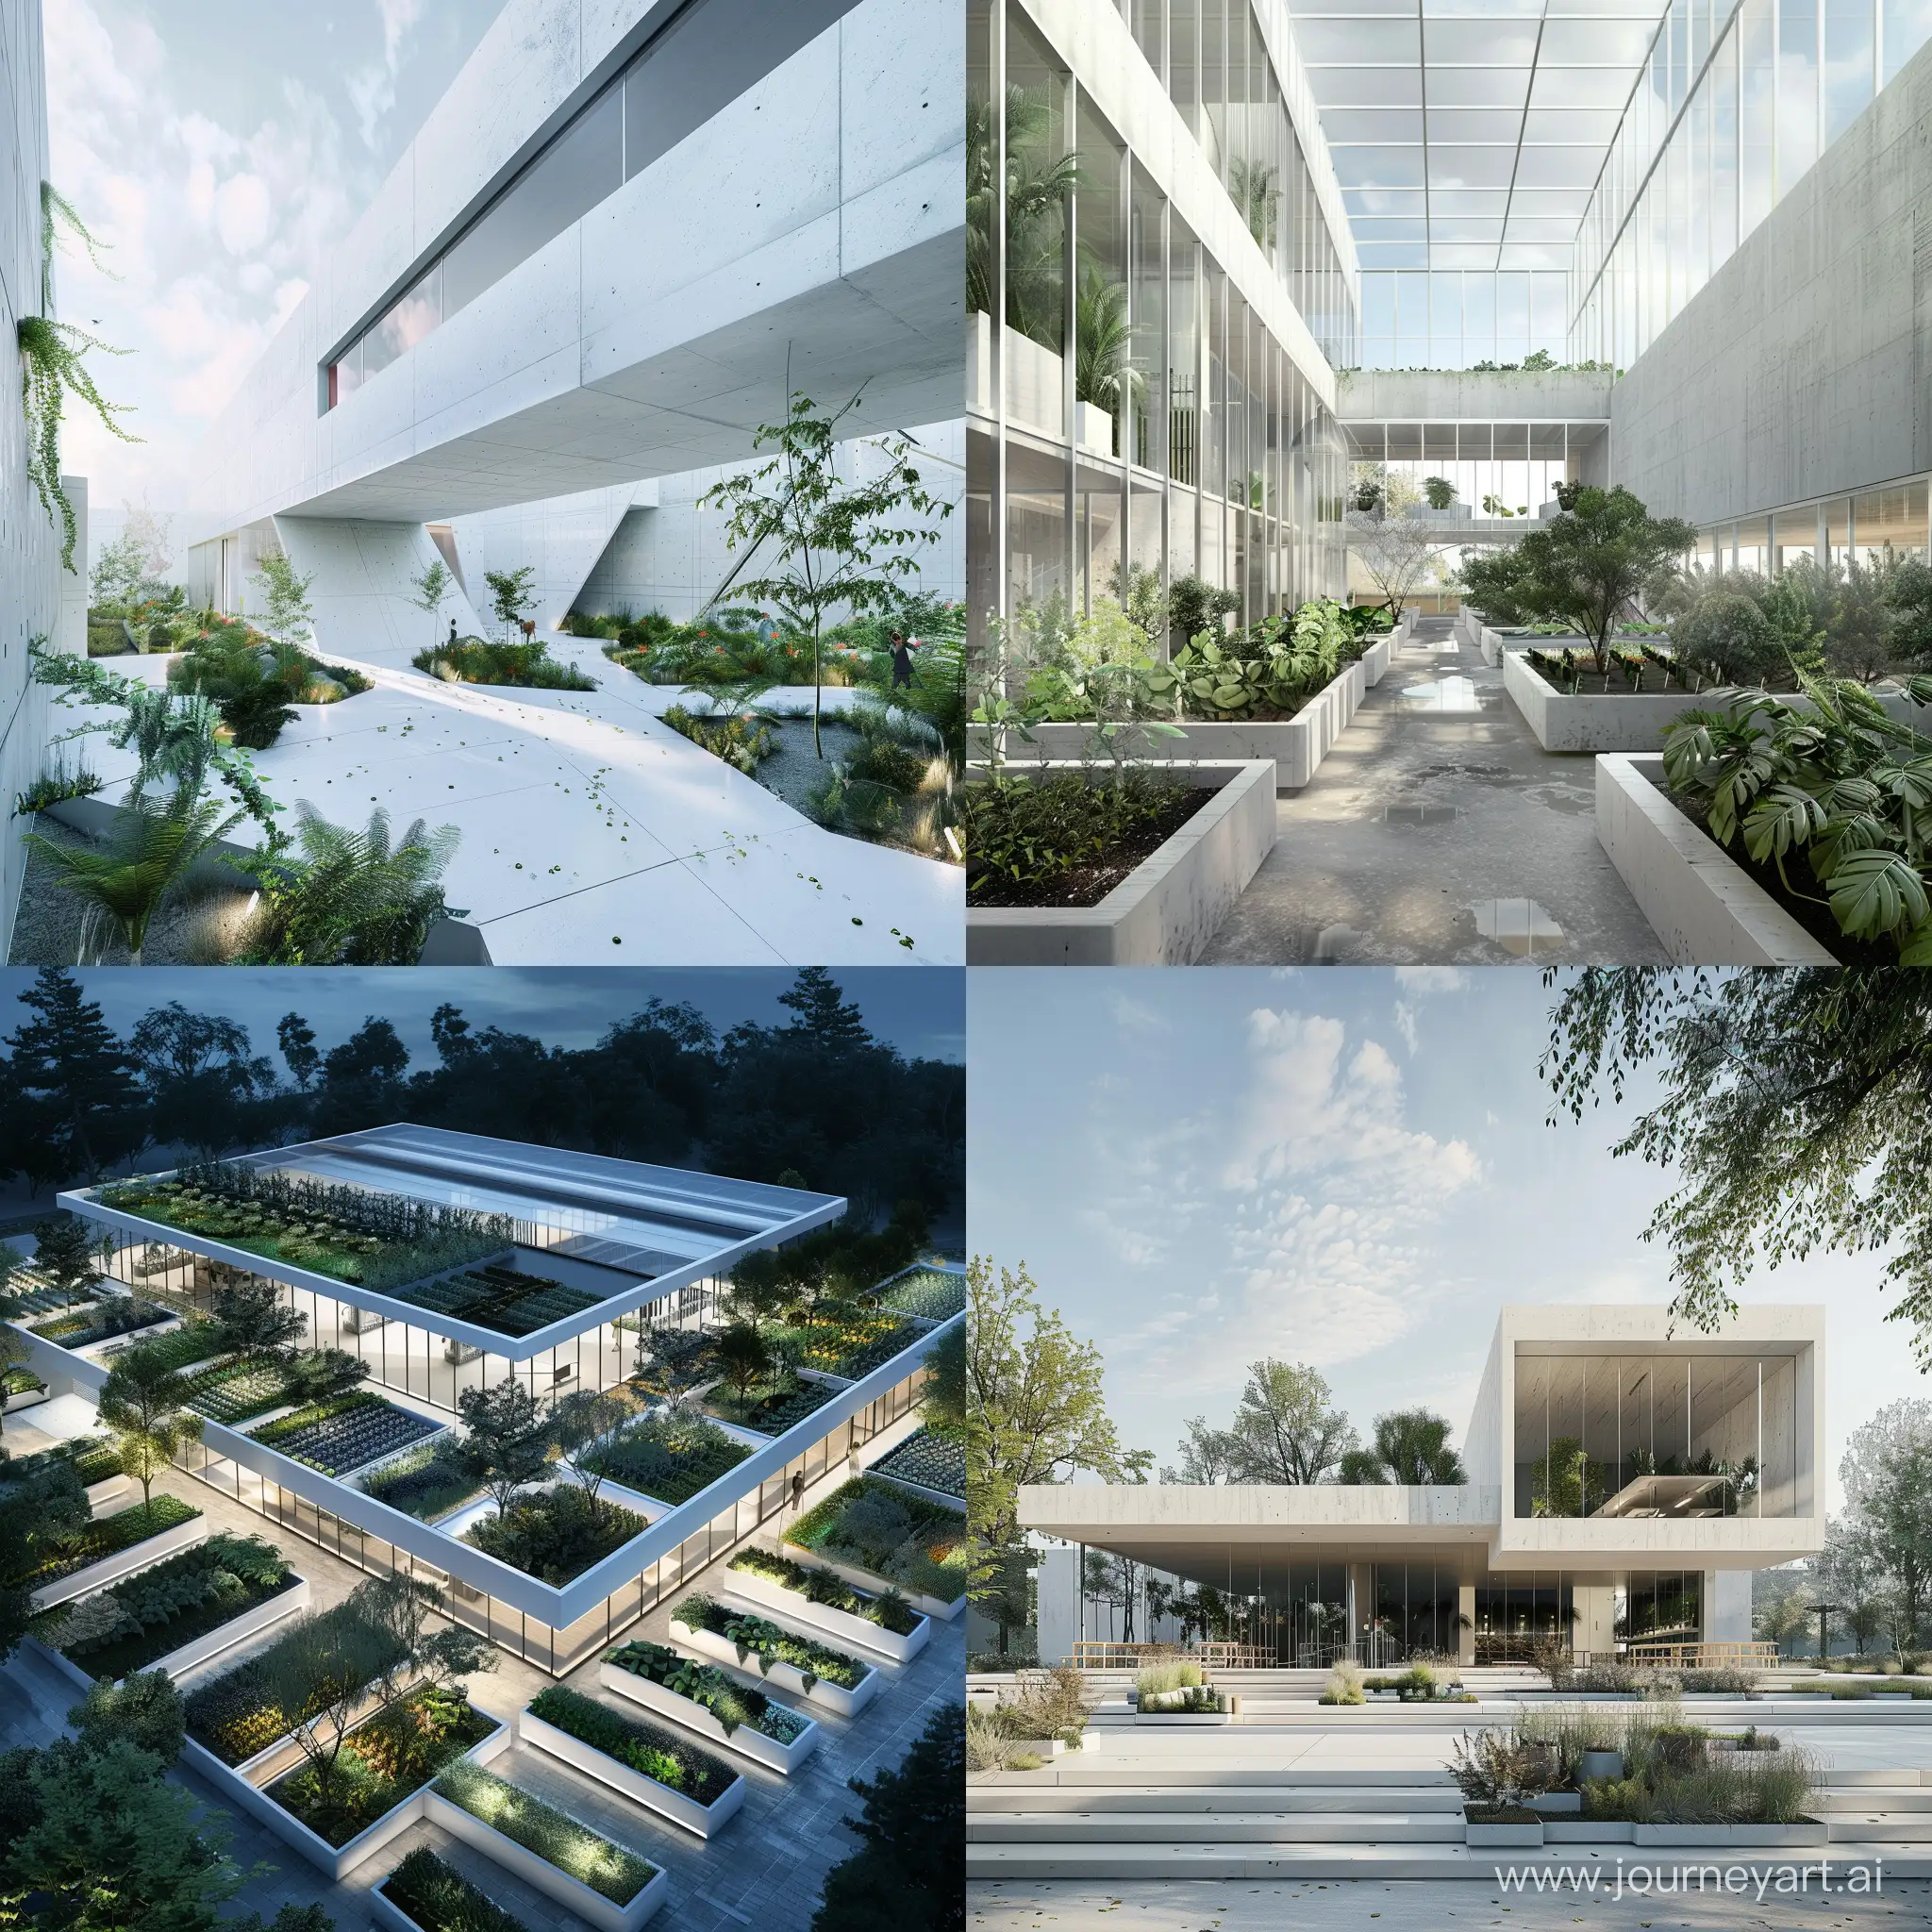 Building a research center and plant exhibition, one floor, modern style, white concrete material, preferably rectangular.